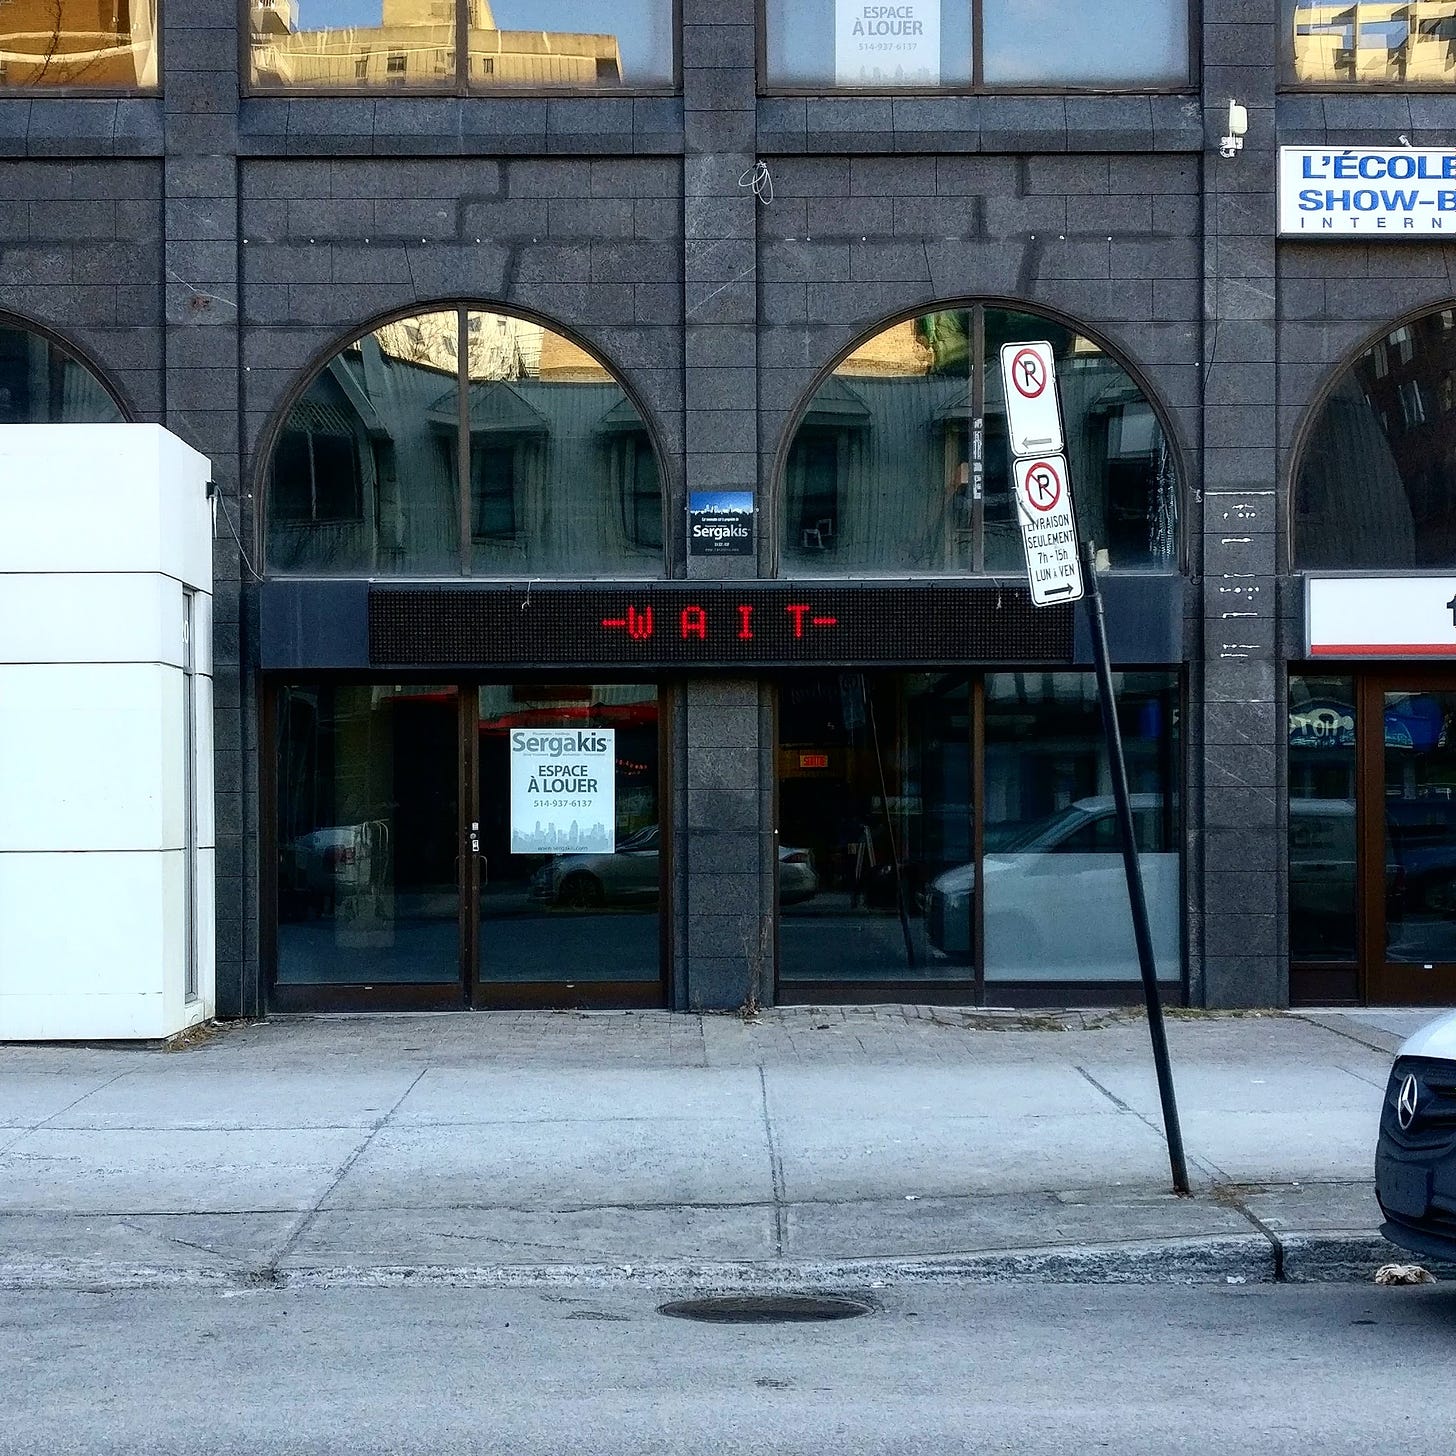 An empty storefront in Montreal with an electronic sign that says "- wait -"